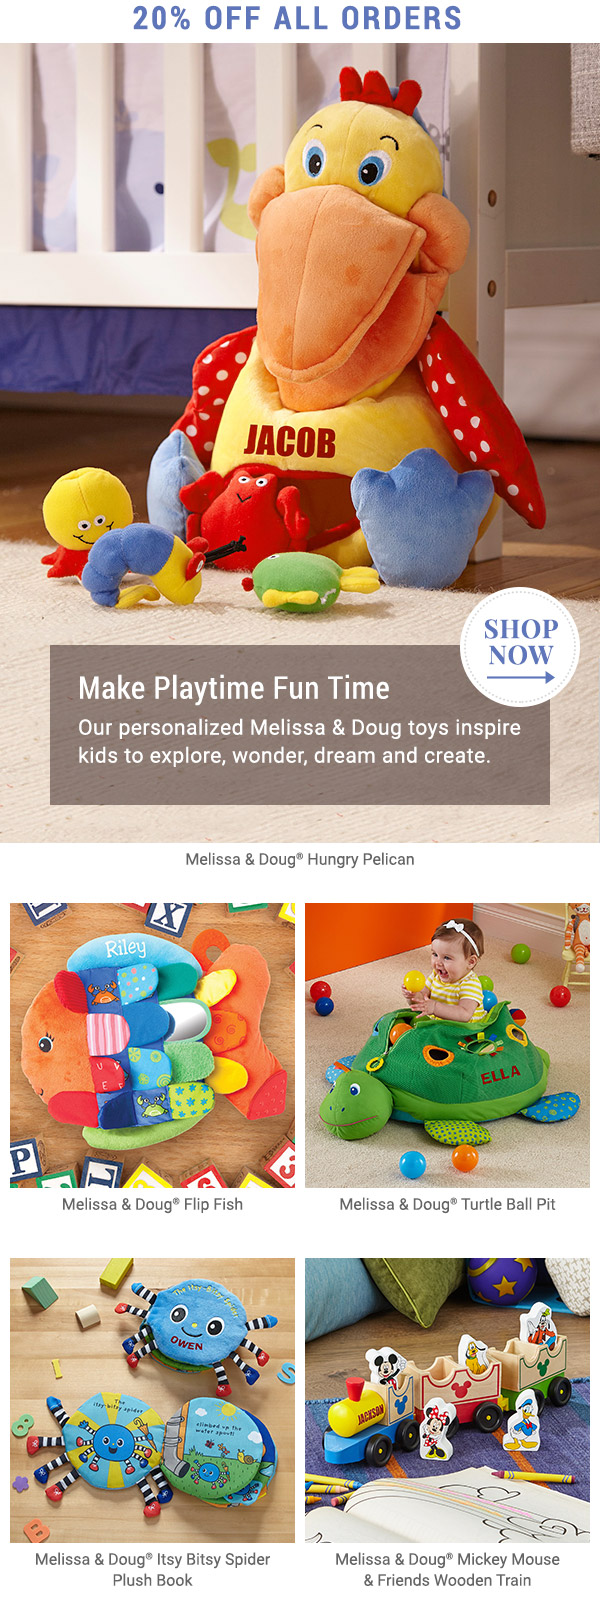 20% off all orders. Make Playtime Fun Time.